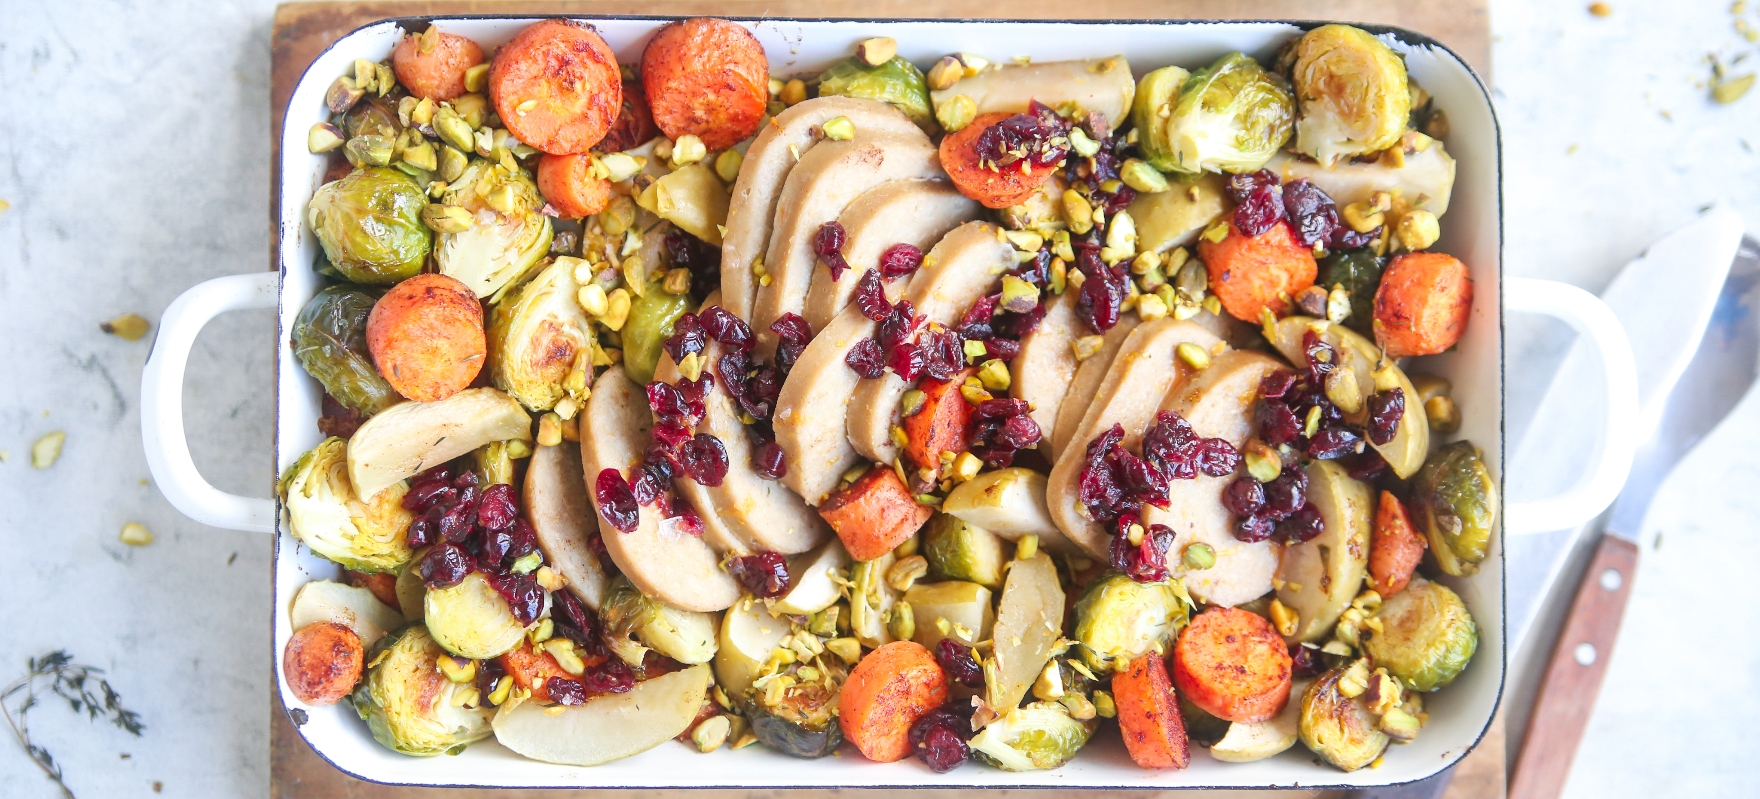 Vegie Roast with Brussels Sprouts